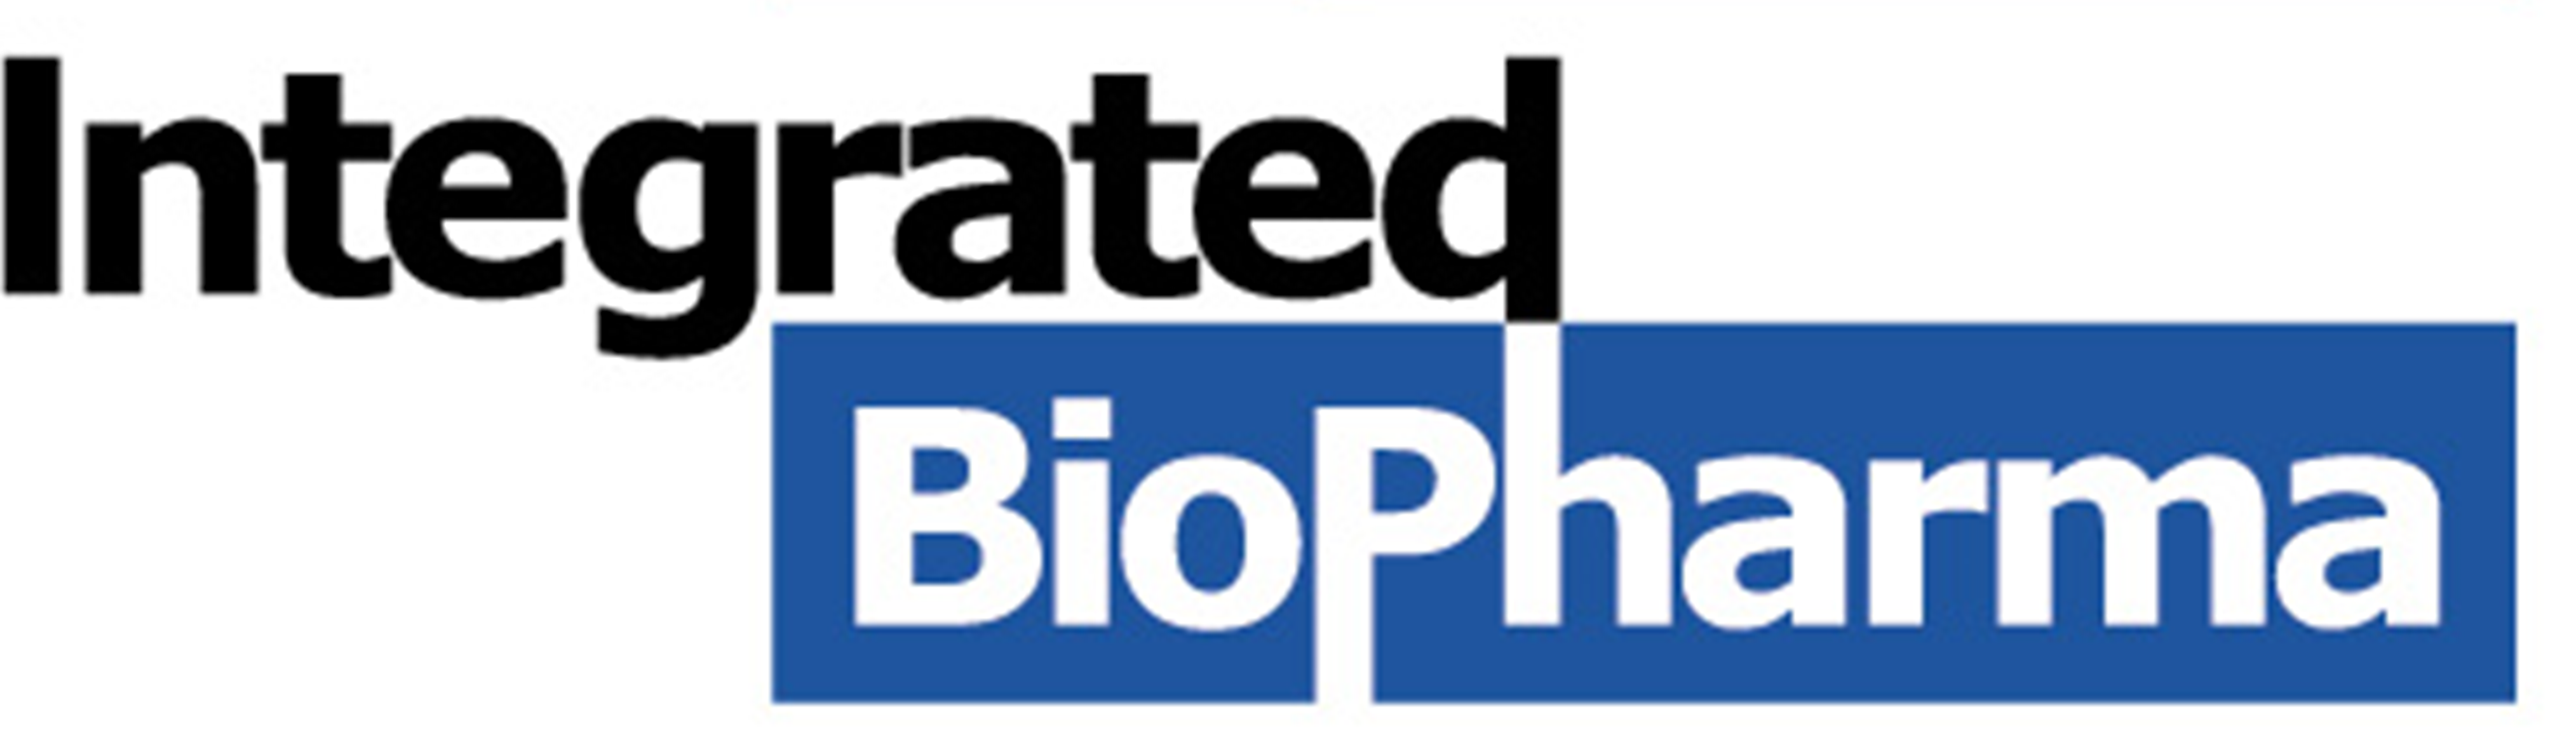 Integrated BioPharma, Inc., Thursday, May 12, 2022, Press release picture